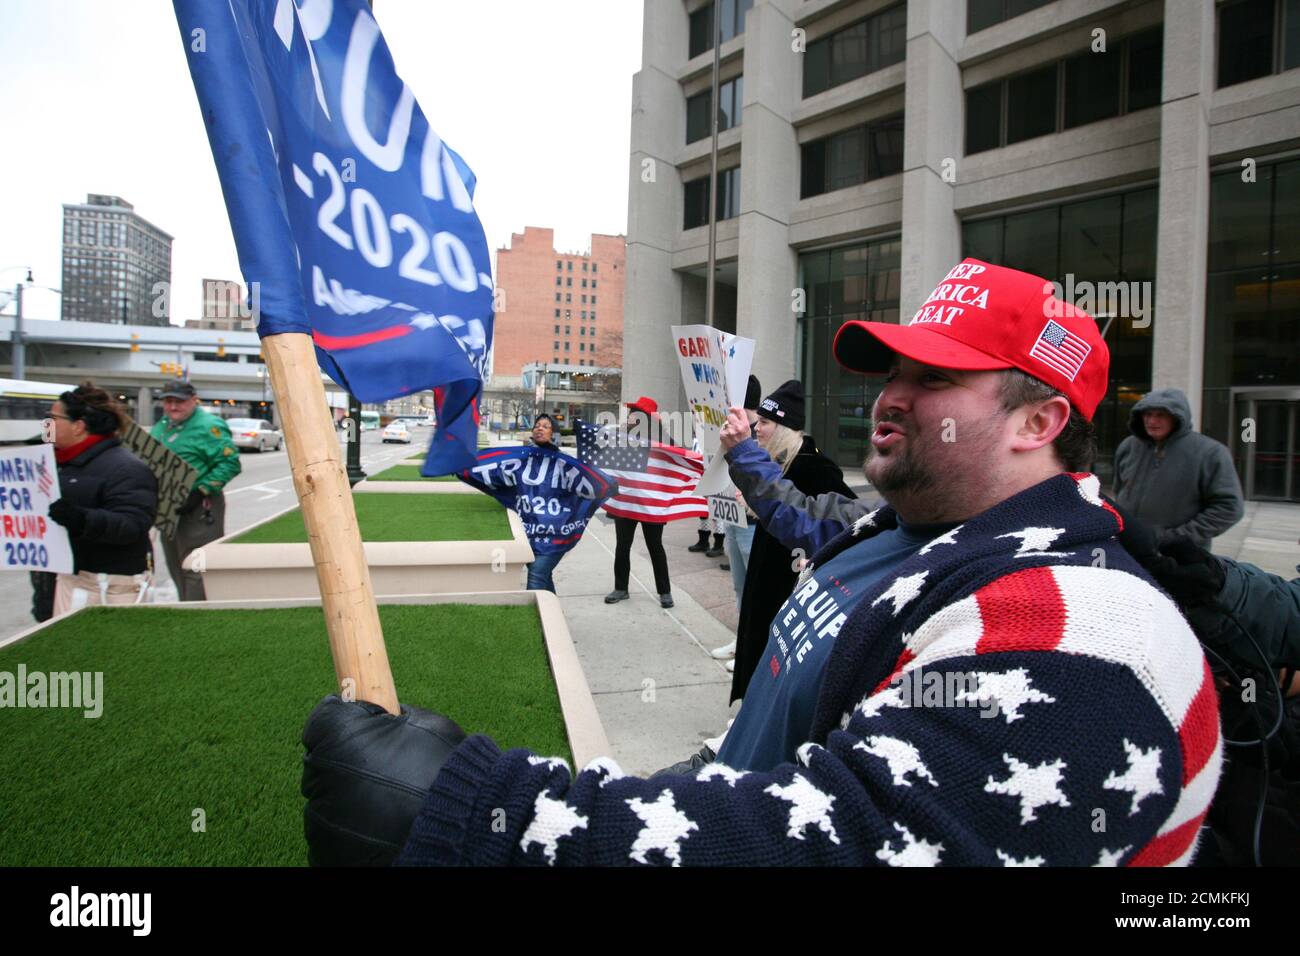 Ben Hirschmann, 24, gathers with other supporters of President Donald Trump to protest the U.S. Senate impeachment trial of the president, in downtown Detroit, Michigan, U.S. January 25, 2020. Picture taken January 25, 2020. REUTERS/Michael Martina Stock Photo